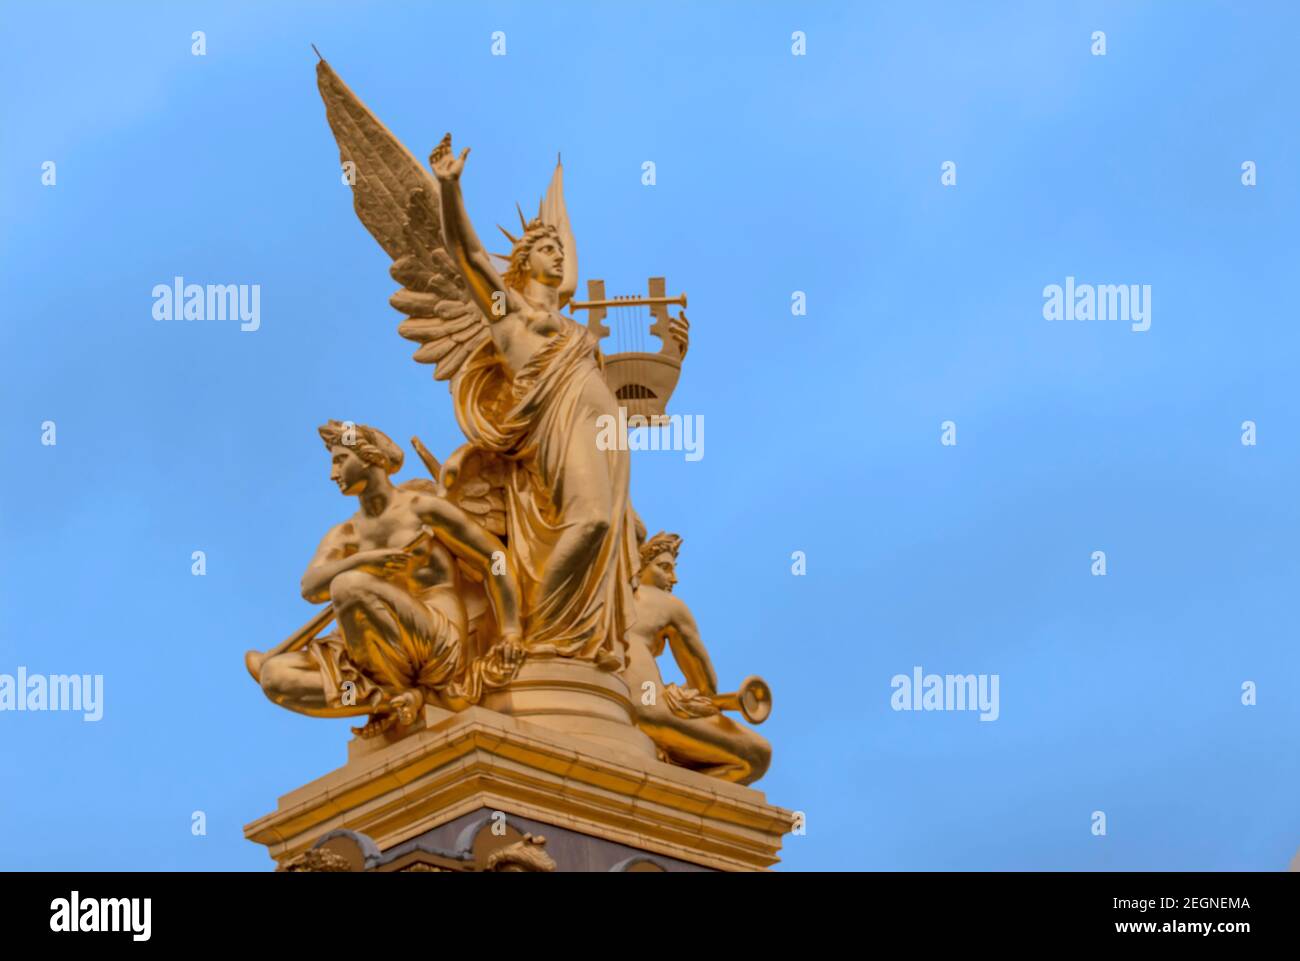 L'Harmonie by Charles Gumery on roof of Opera Garnier, Paris, France with copy space Stock Photo